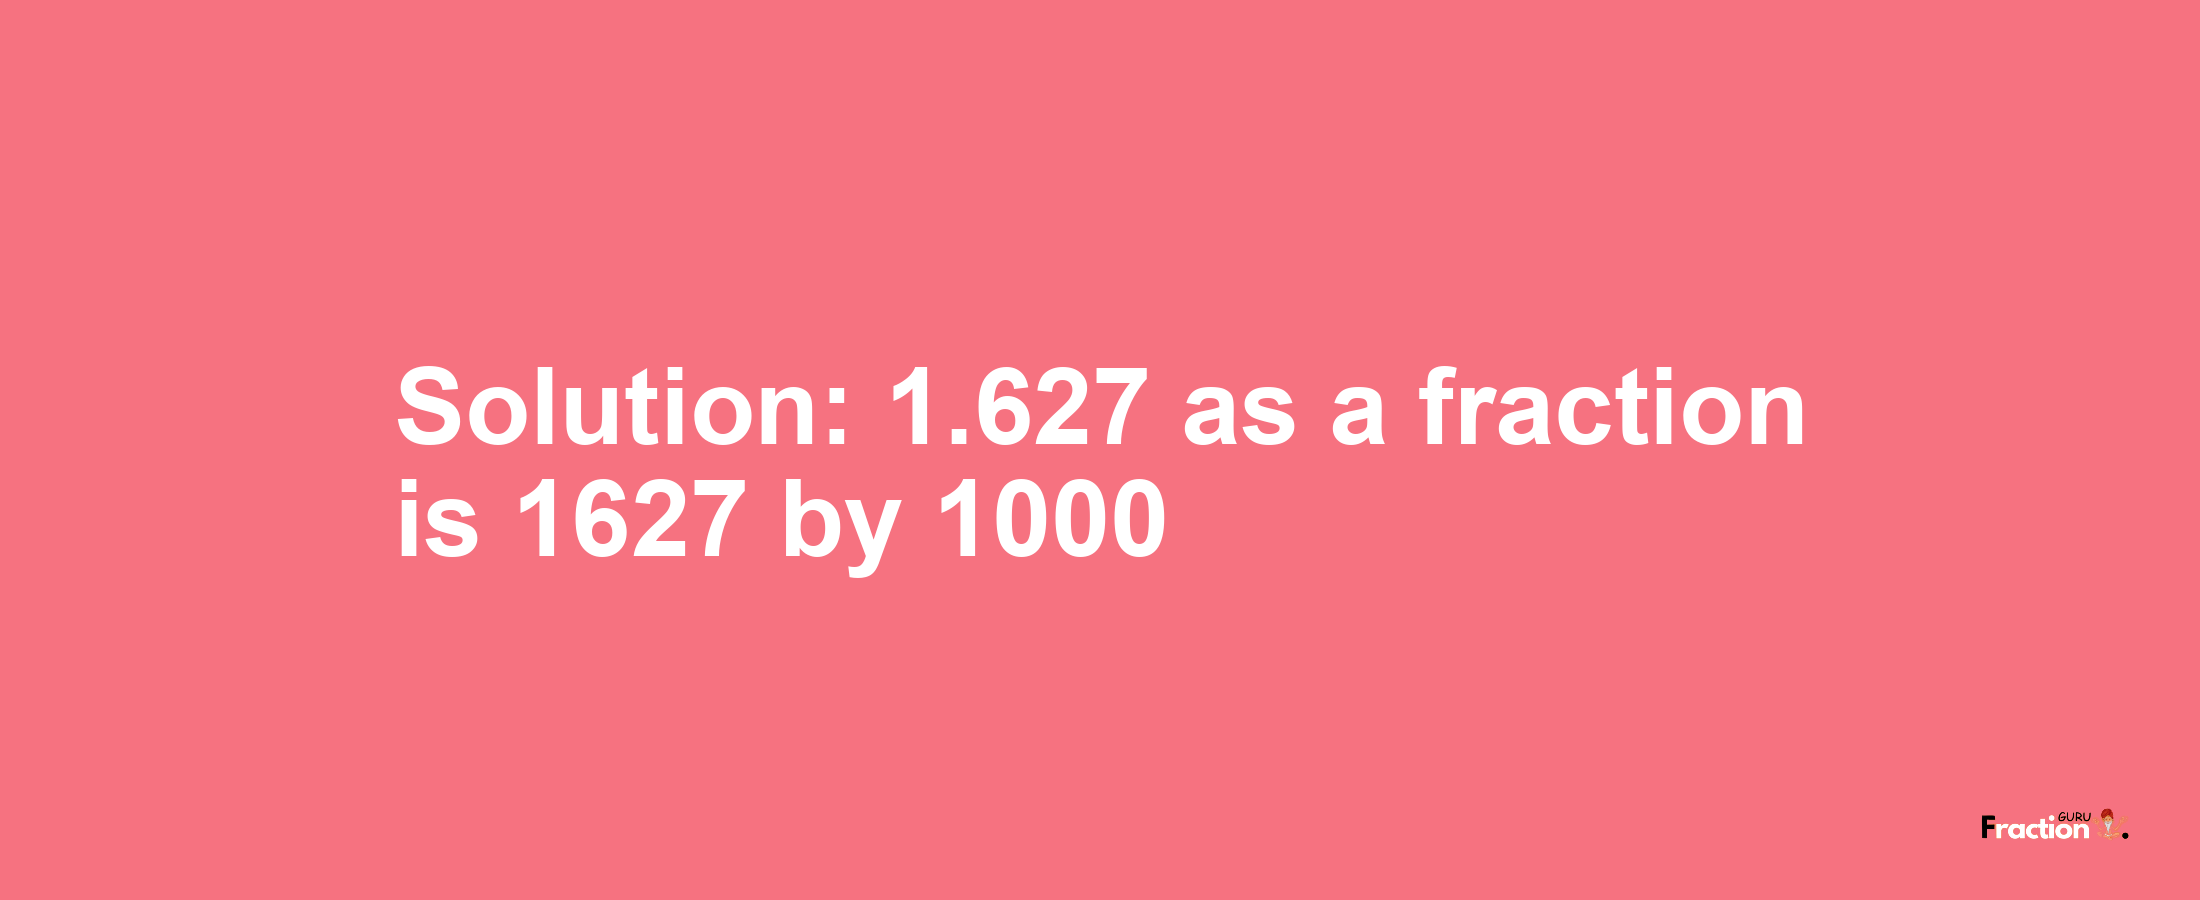 Solution:1.627 as a fraction is 1627/1000